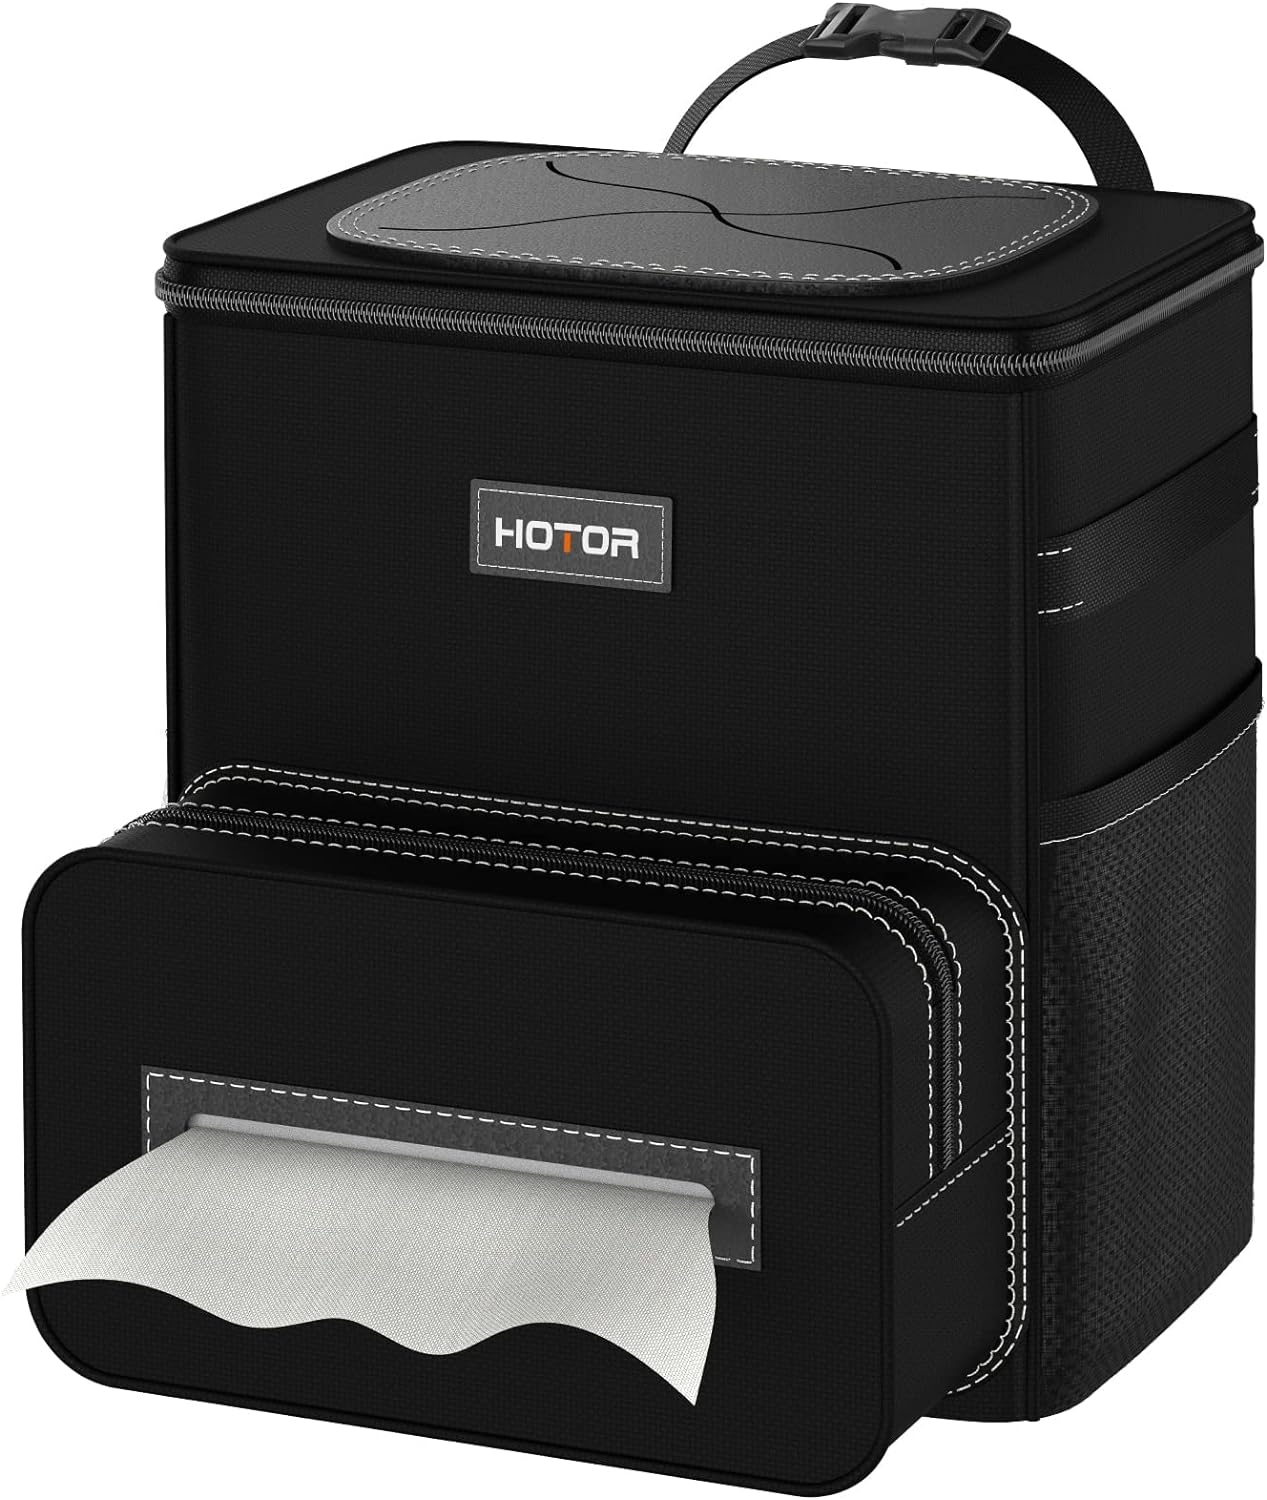 HOTOR Car Trash Can 2.5 Gallon - Handy Tissue Holder, Easy-to-Install Car Accessory Interior, Leak-Proof Organizer and Storage Bag for the Back/Front/Console of Any Cars, Sedans, SUVs & Trucks